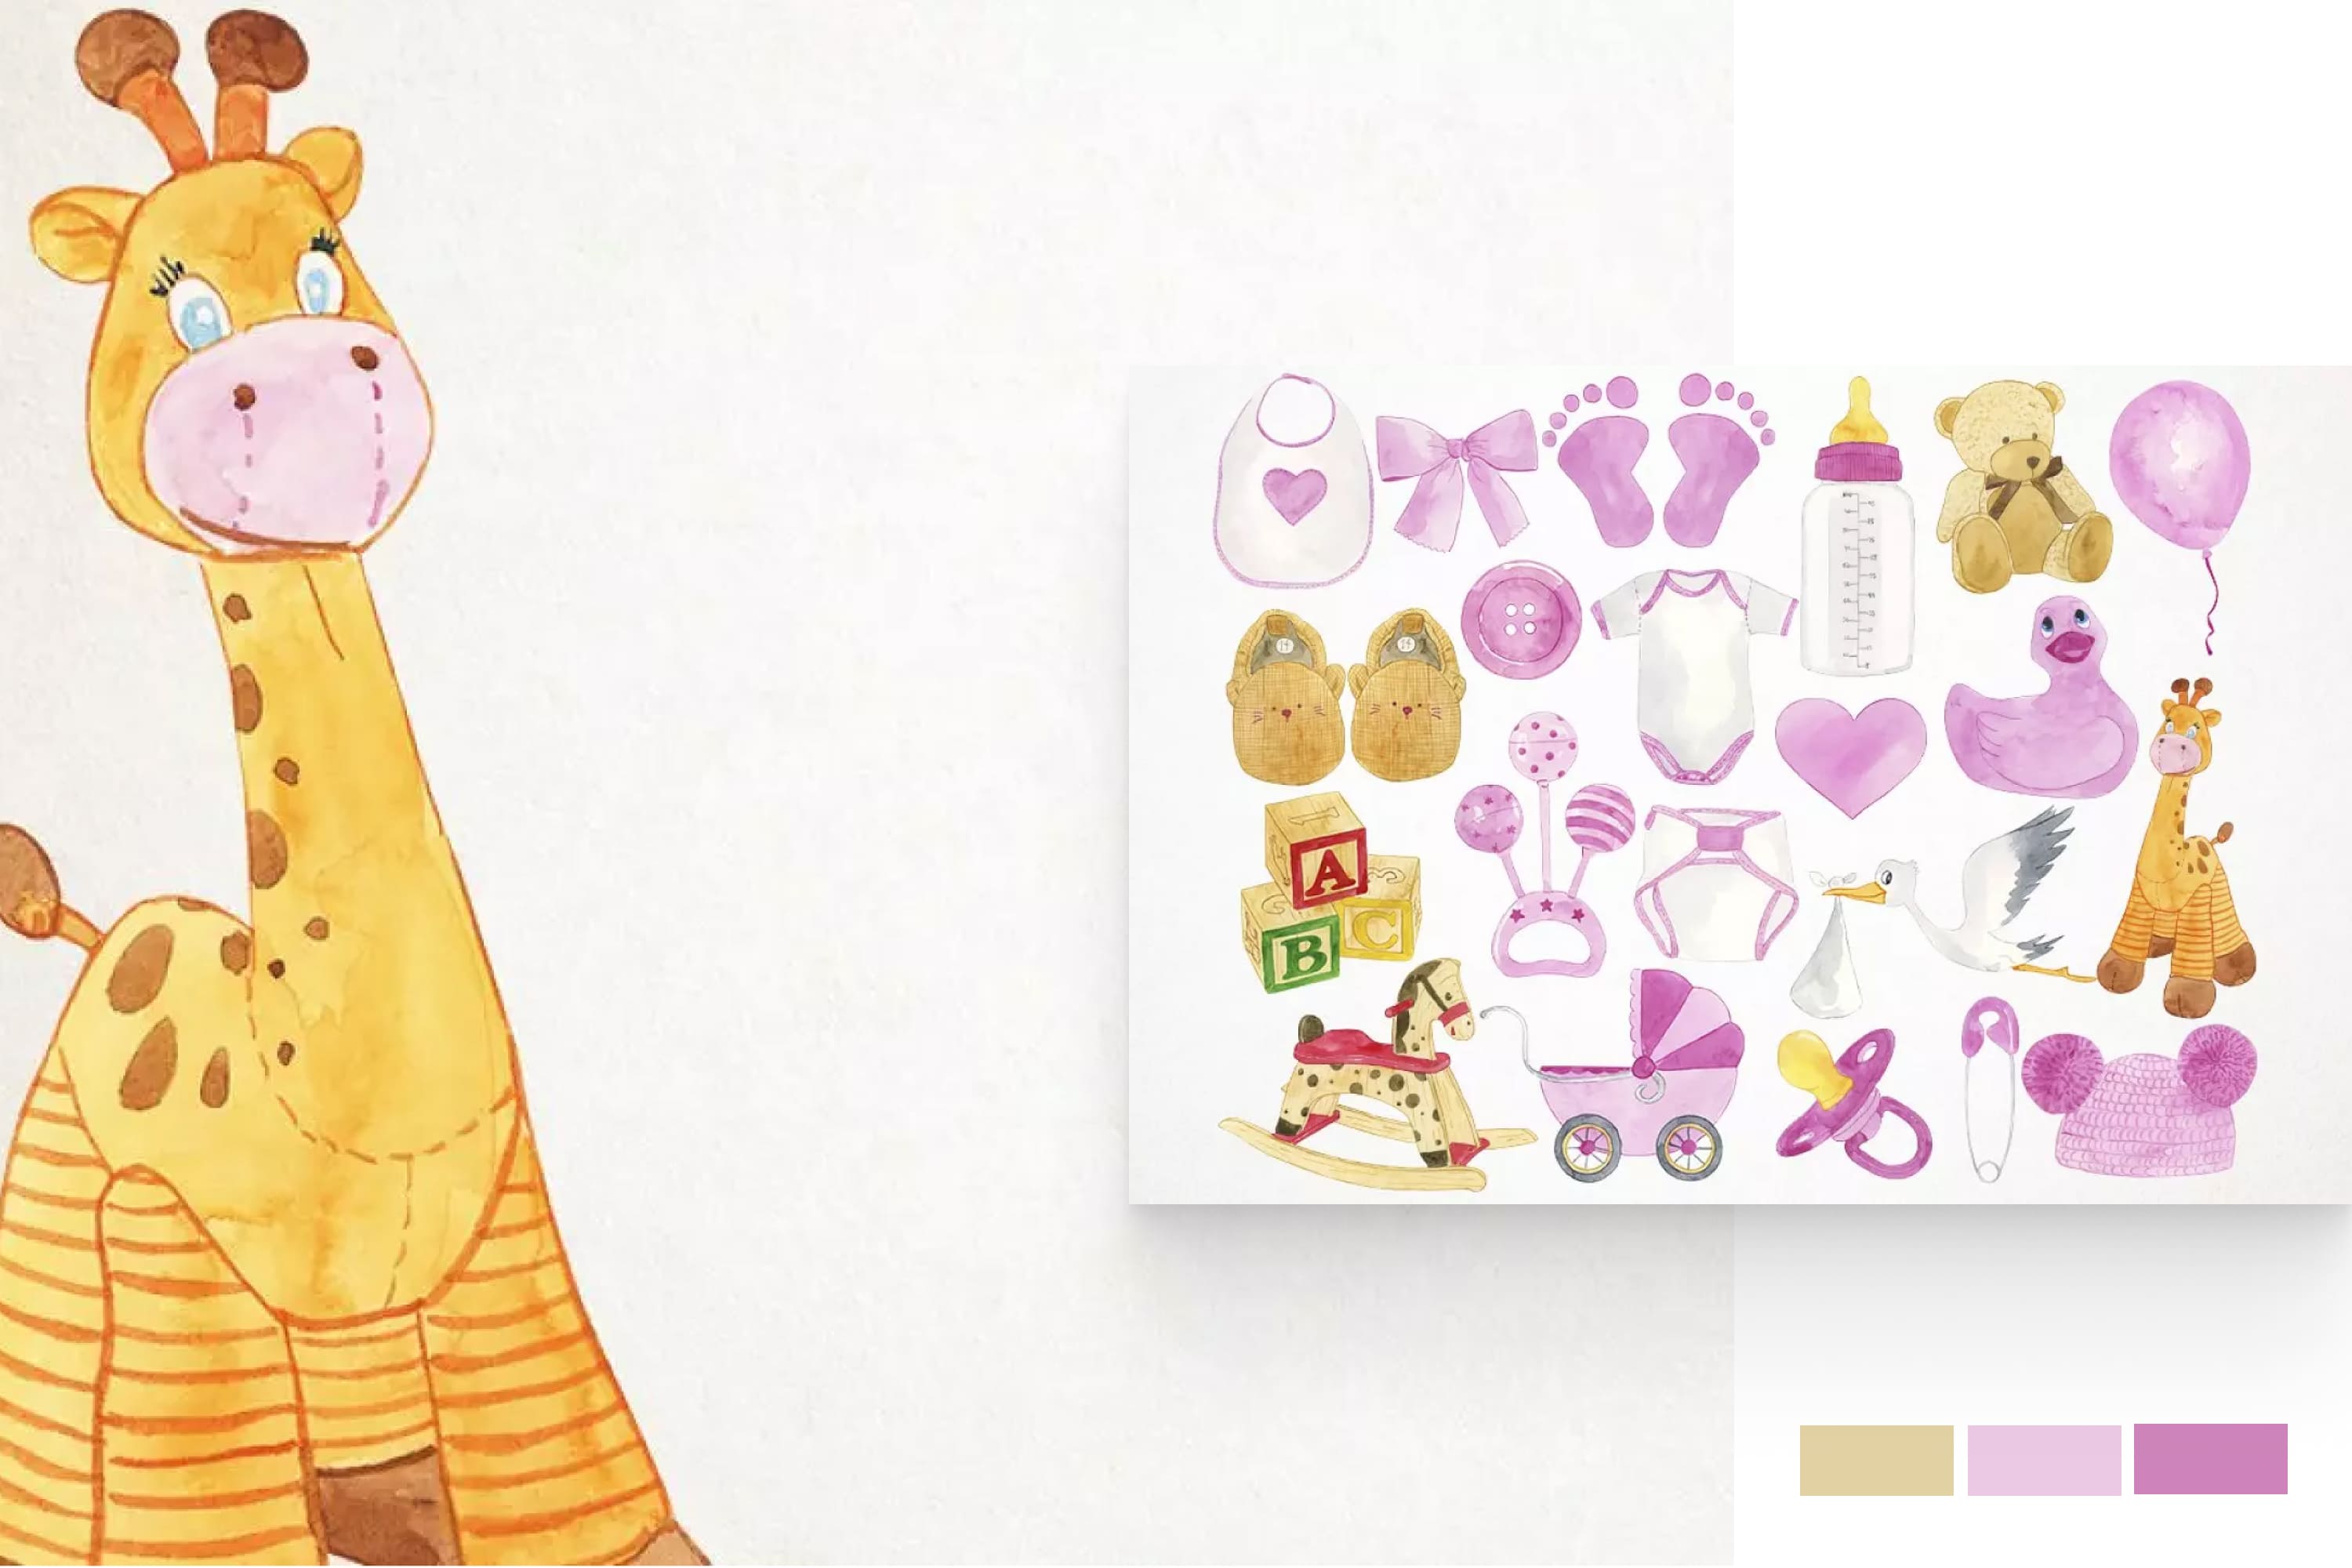 A collage of images of children's items in pink and yellow and a plush giraffe.